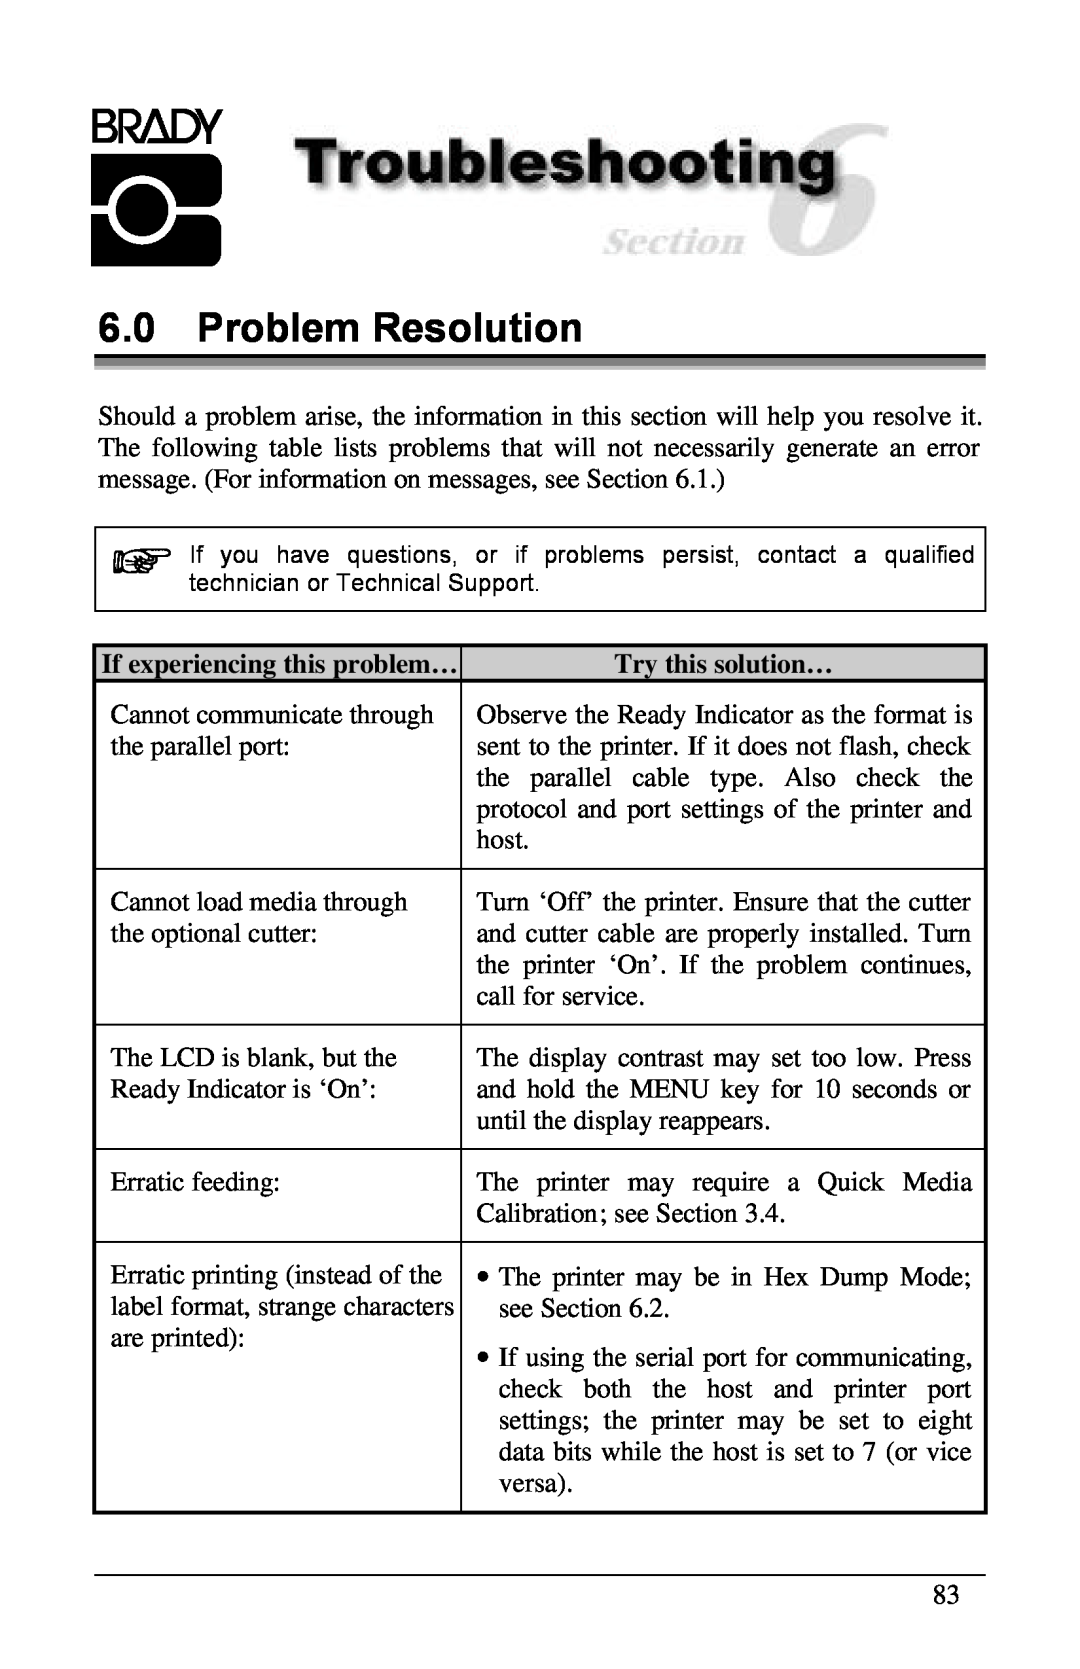 Brady 3481, 6441, 2461 manual Problem Resolution, If experiencing this problem…, Try this solution… 